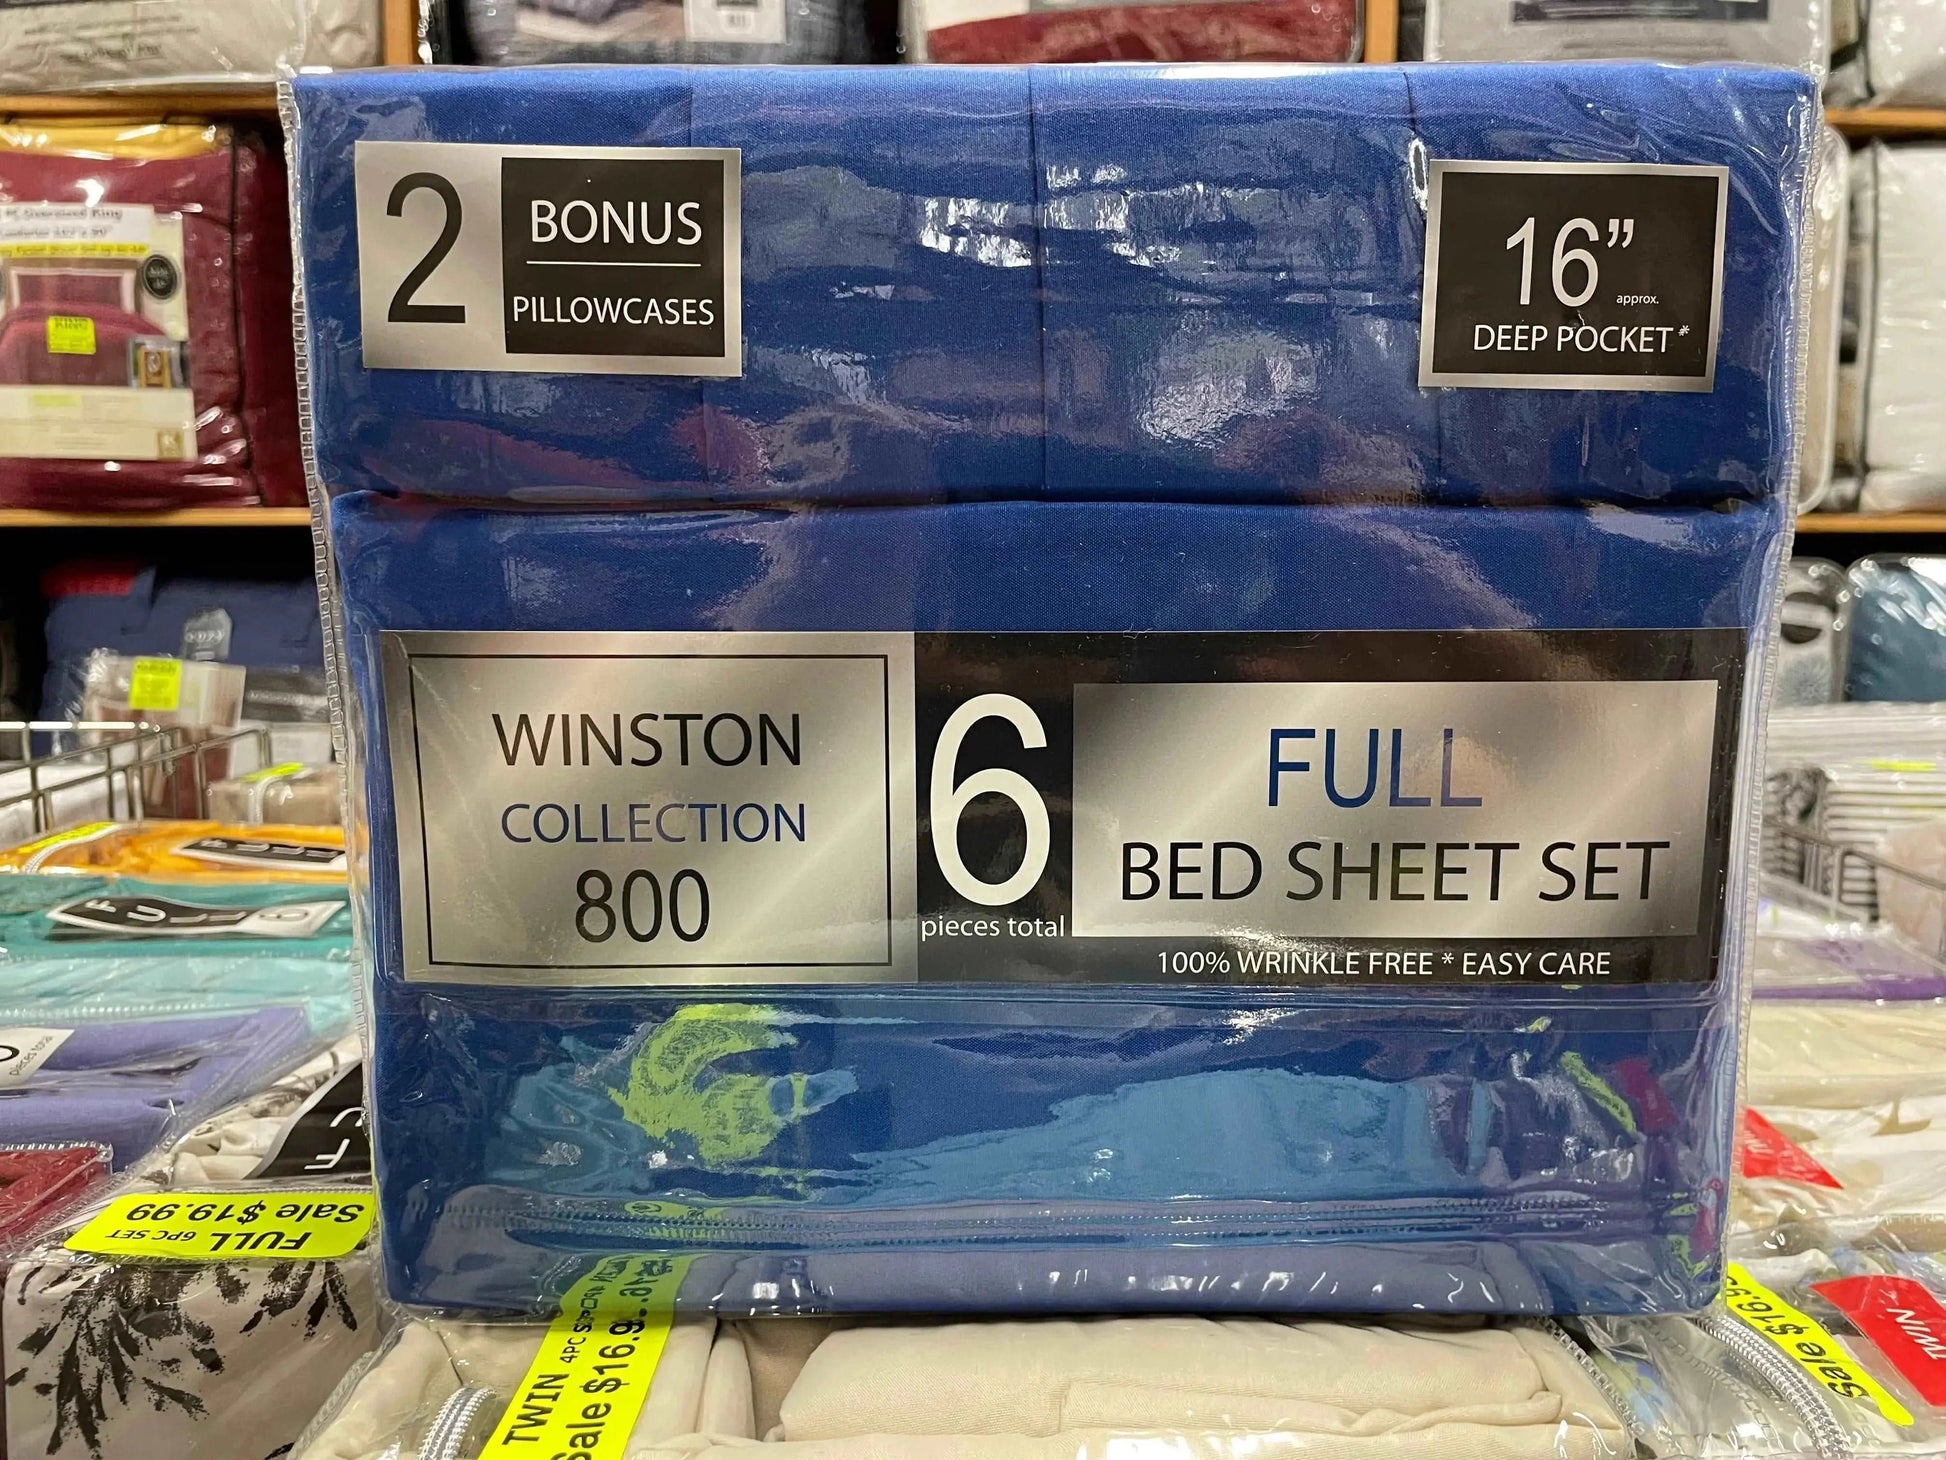 Linen World Bed Sheets “Winston” 800 Collection 6 pc Deep Pocket Sheet Set in All Sizes